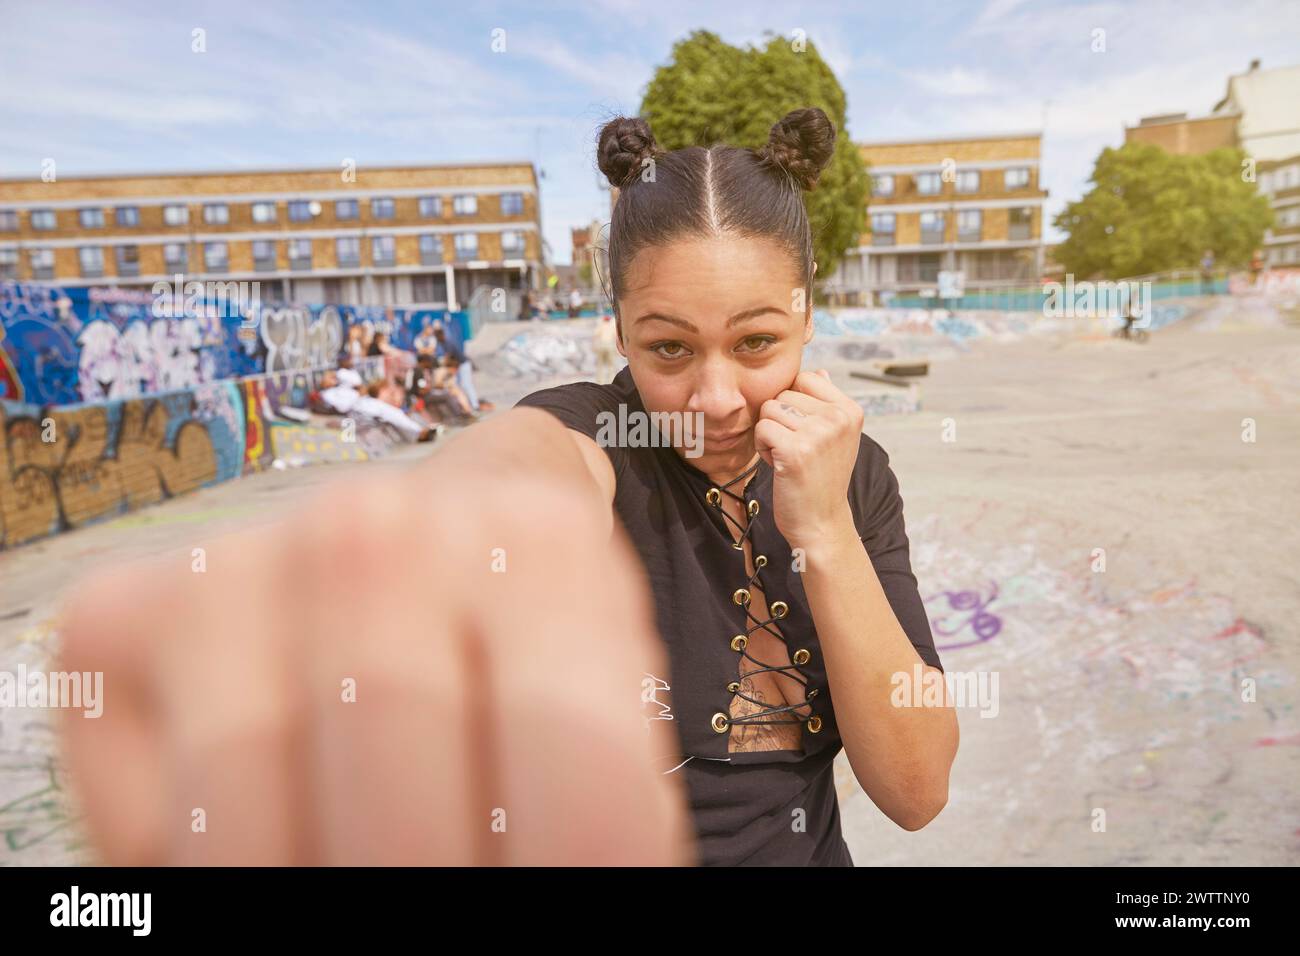 Woman posing with a playful fist to the camera Stock Photo